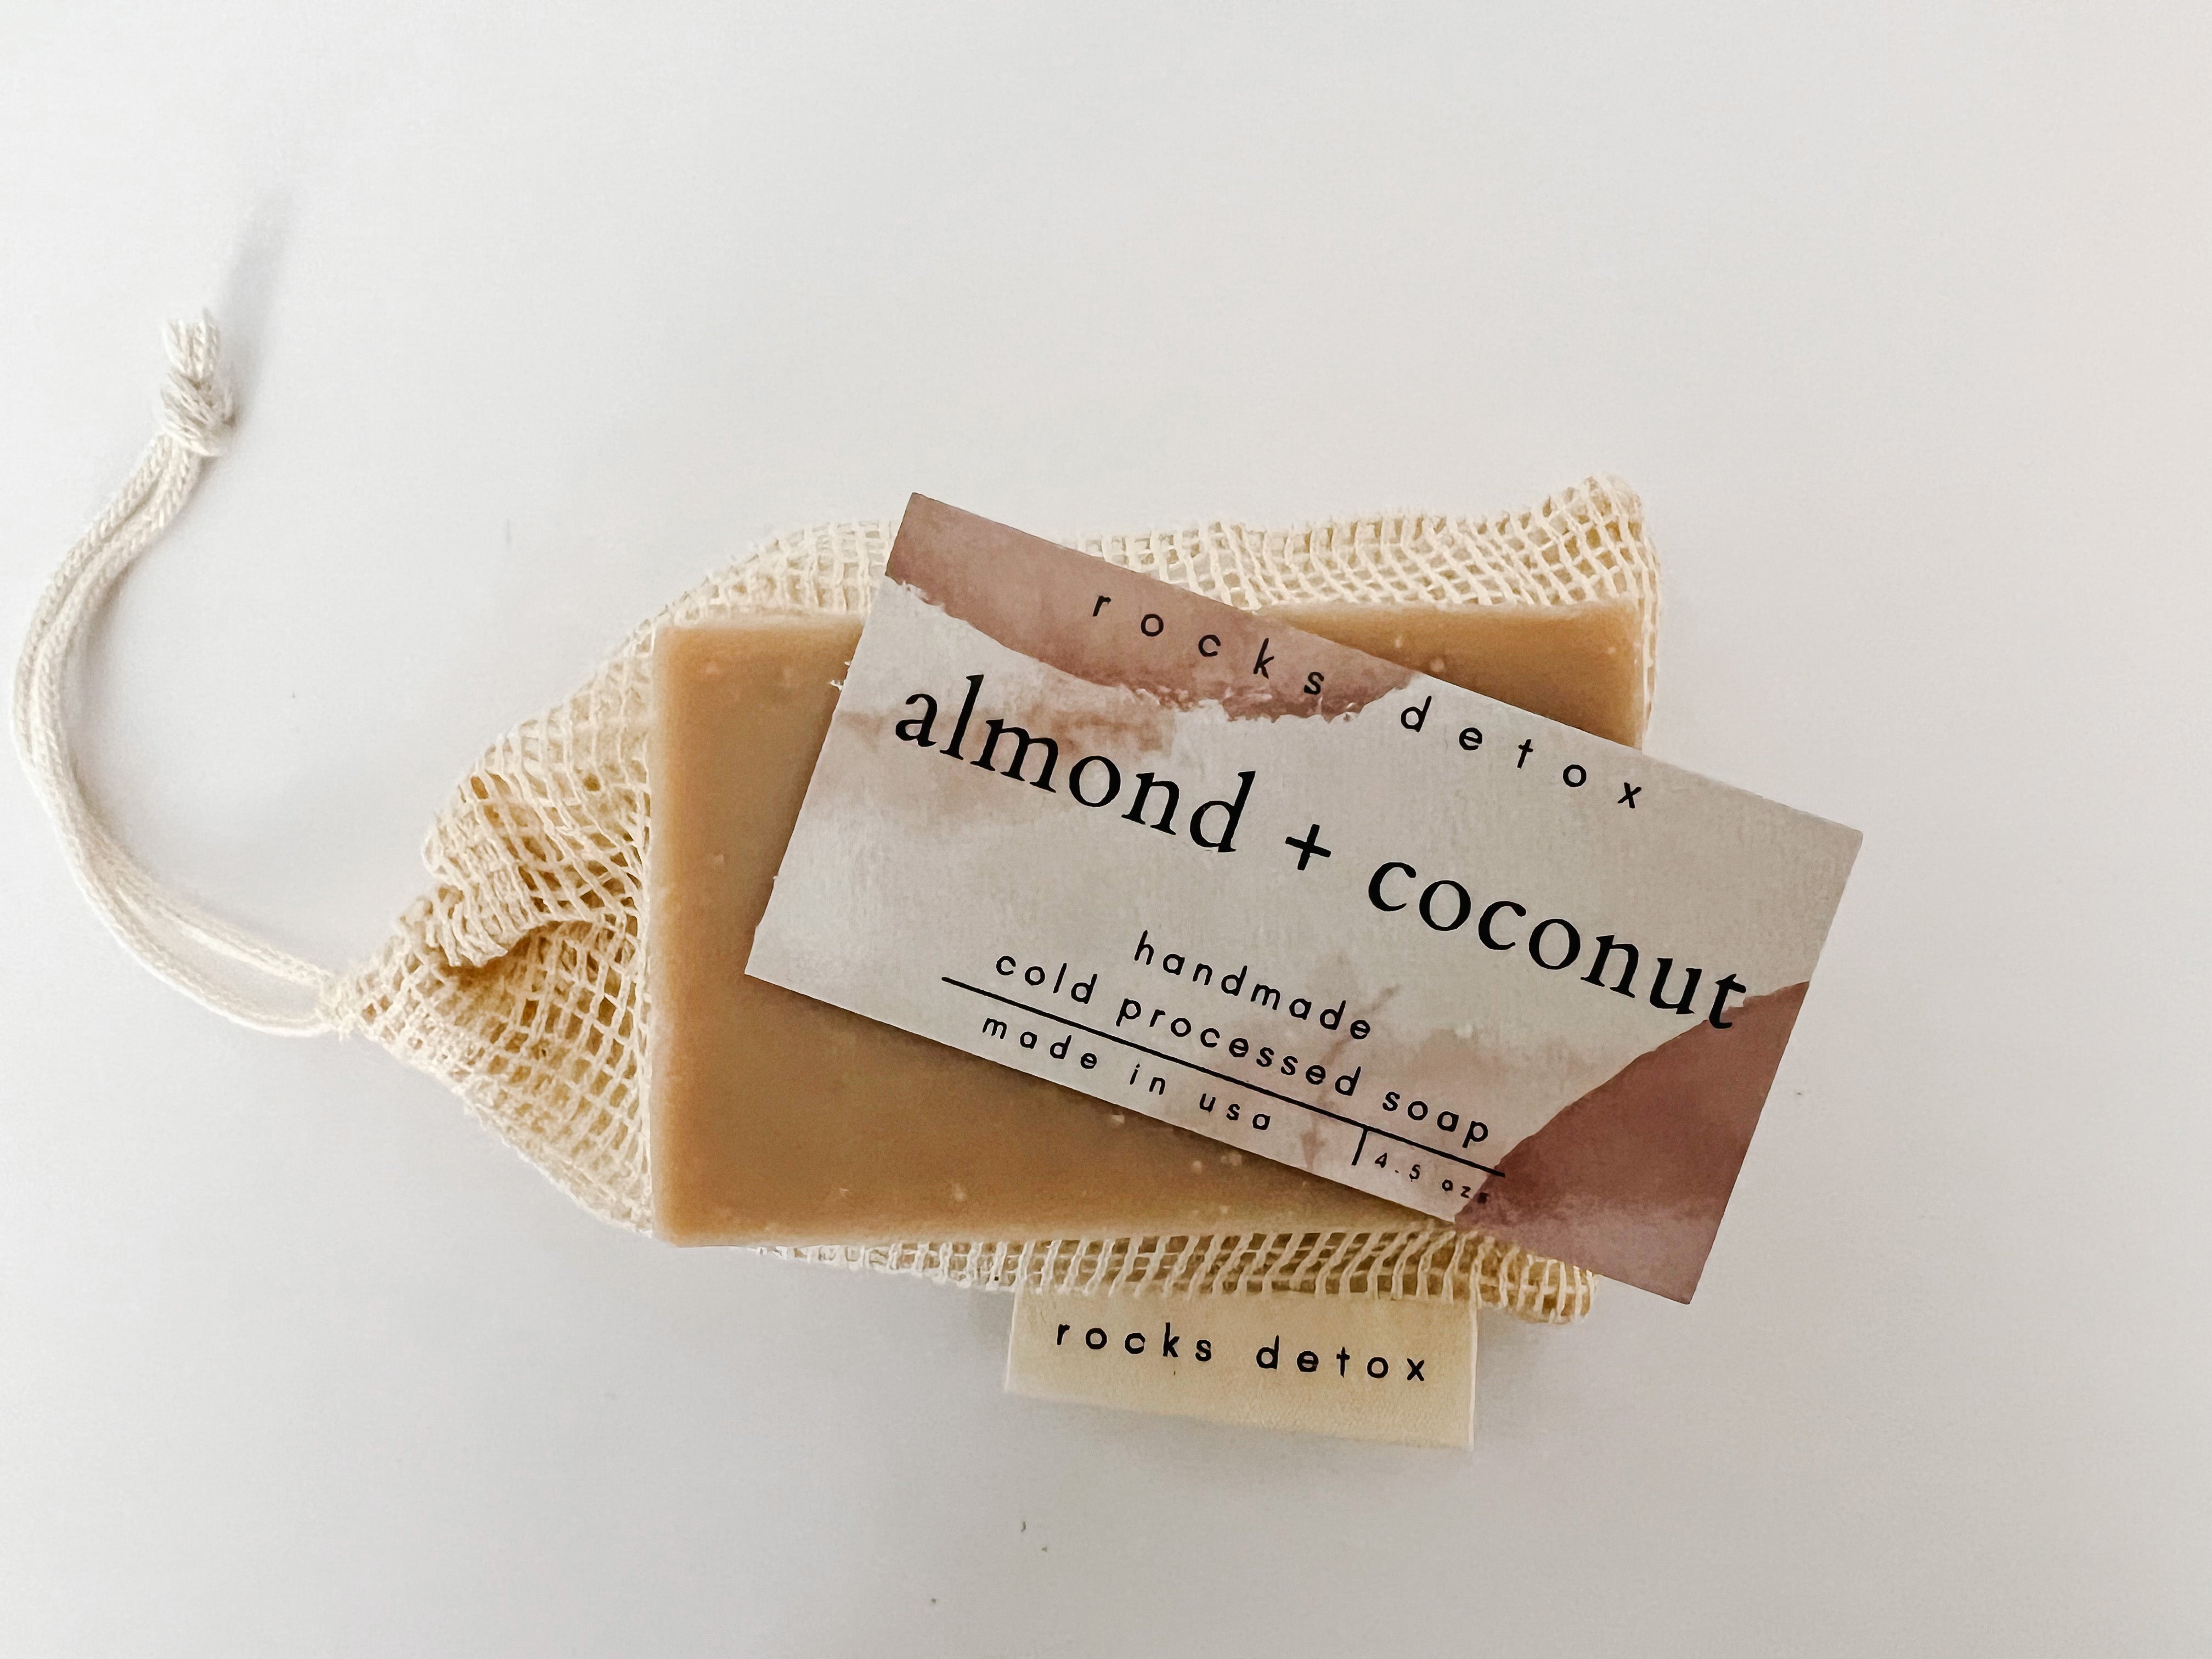 Almond + Coconut All Natural Handmade Soap